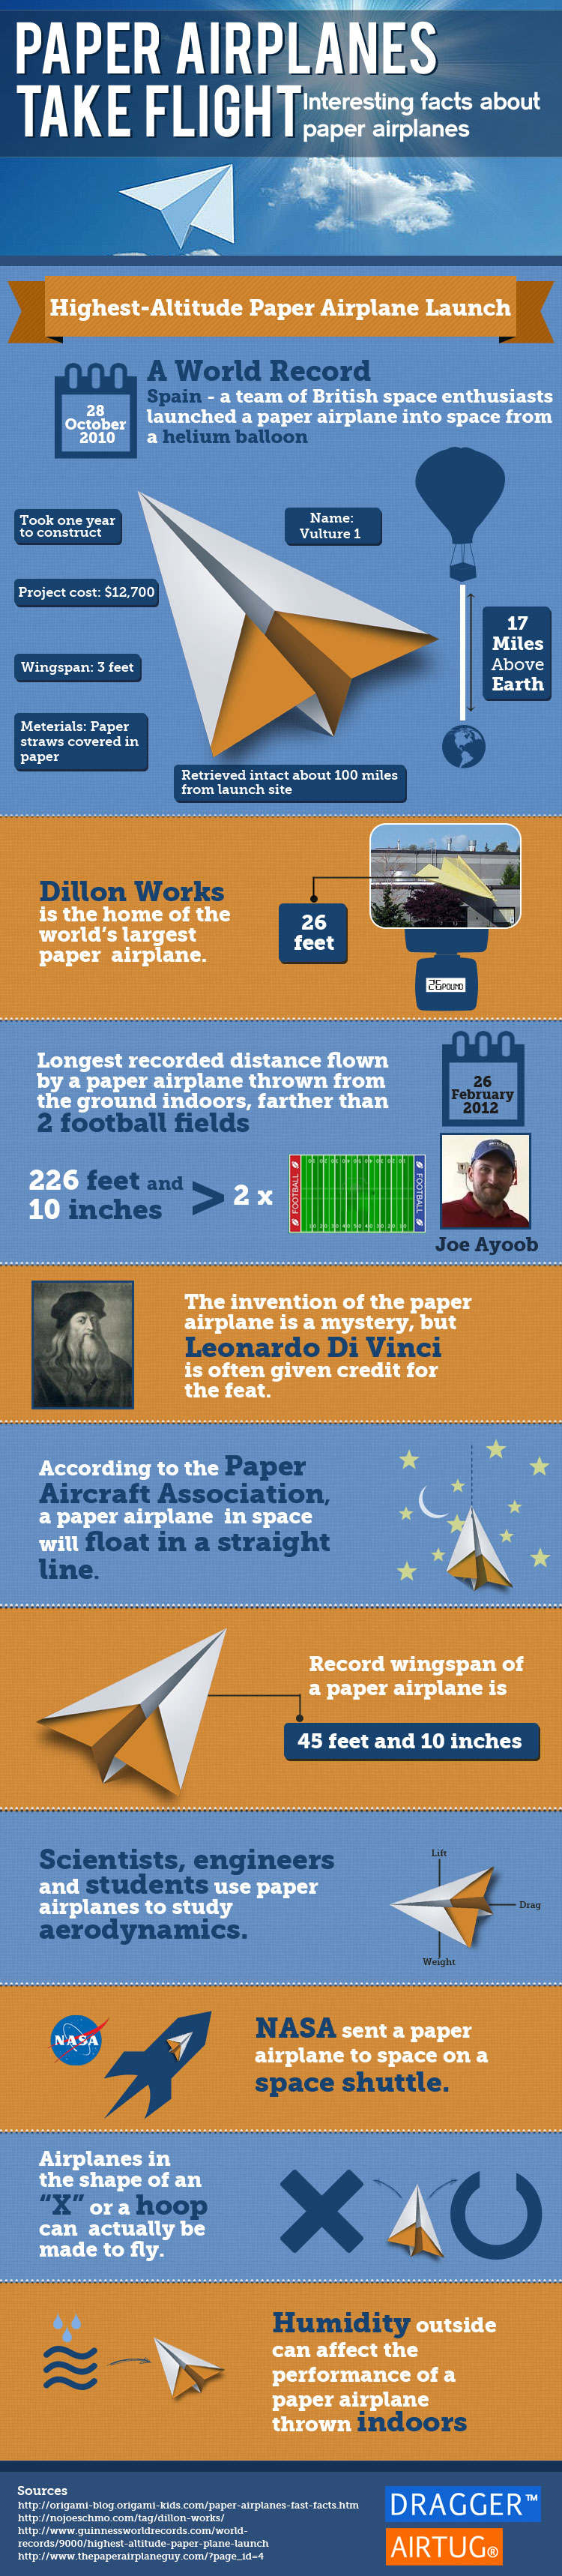 Paper Airplanes Take Flight - Infographic | AIRTUG